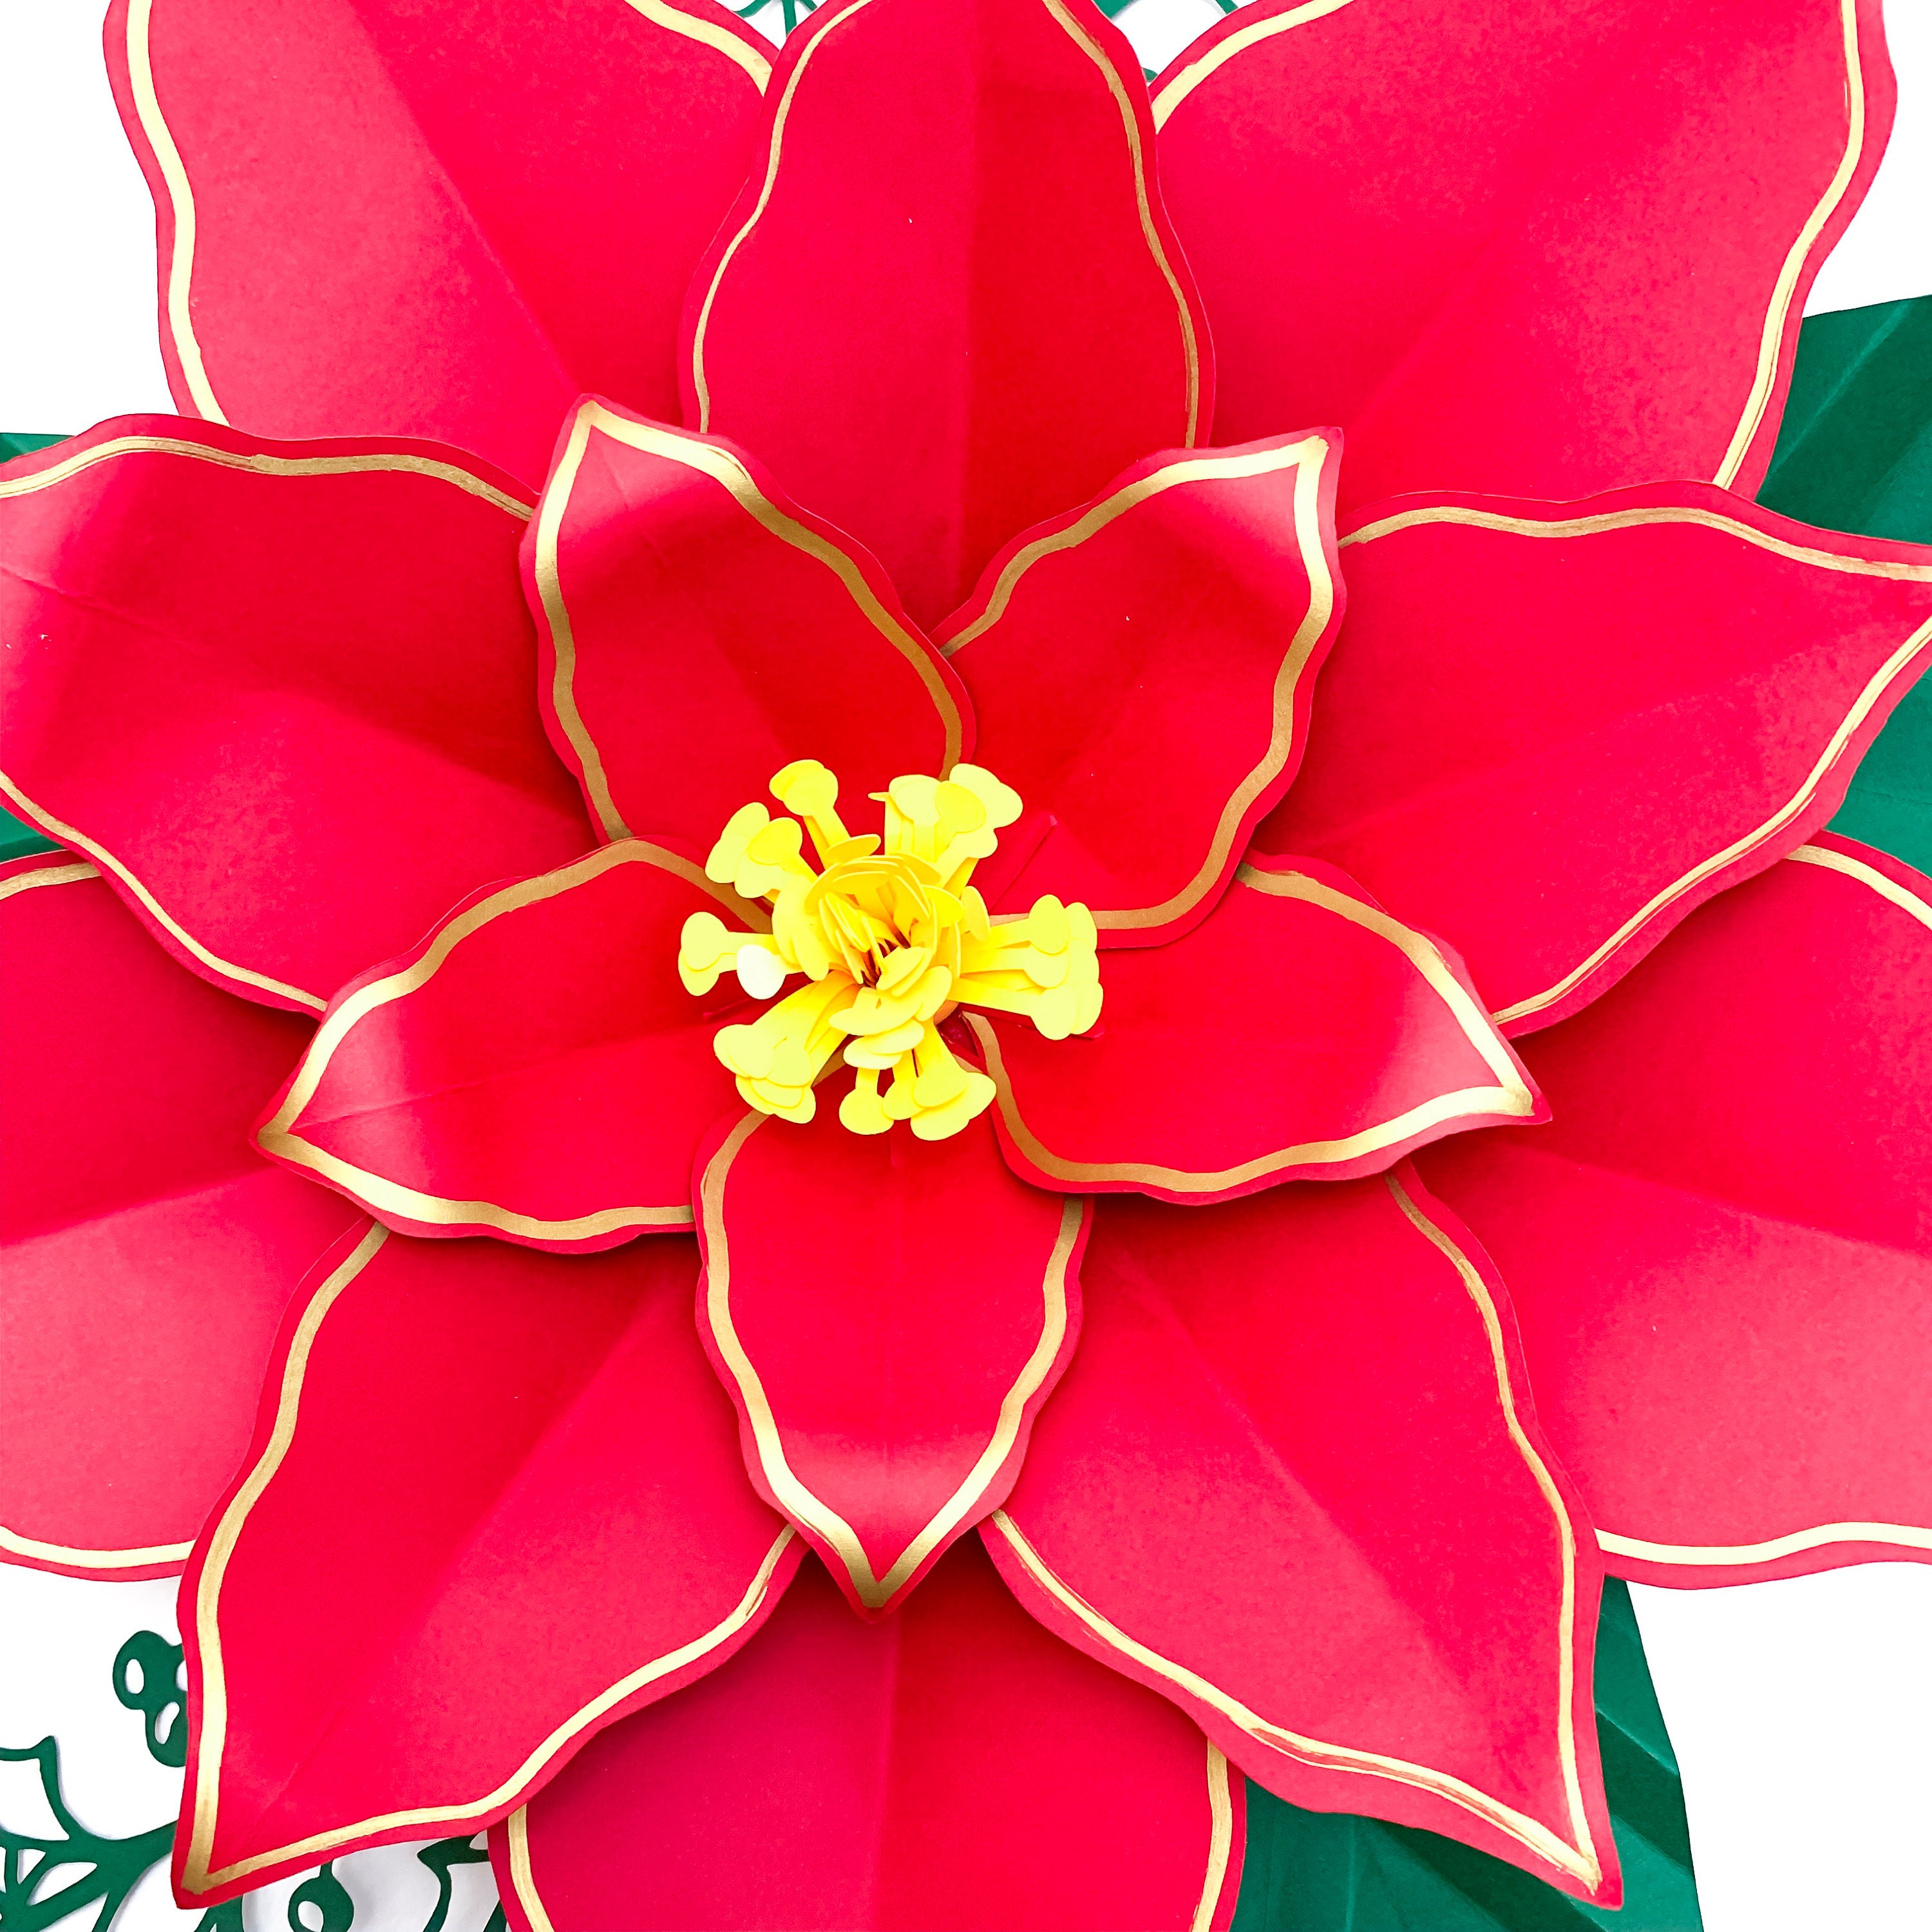 Layered Poinsettia Svg For Silhouette - Layered SVG Cut File - Download